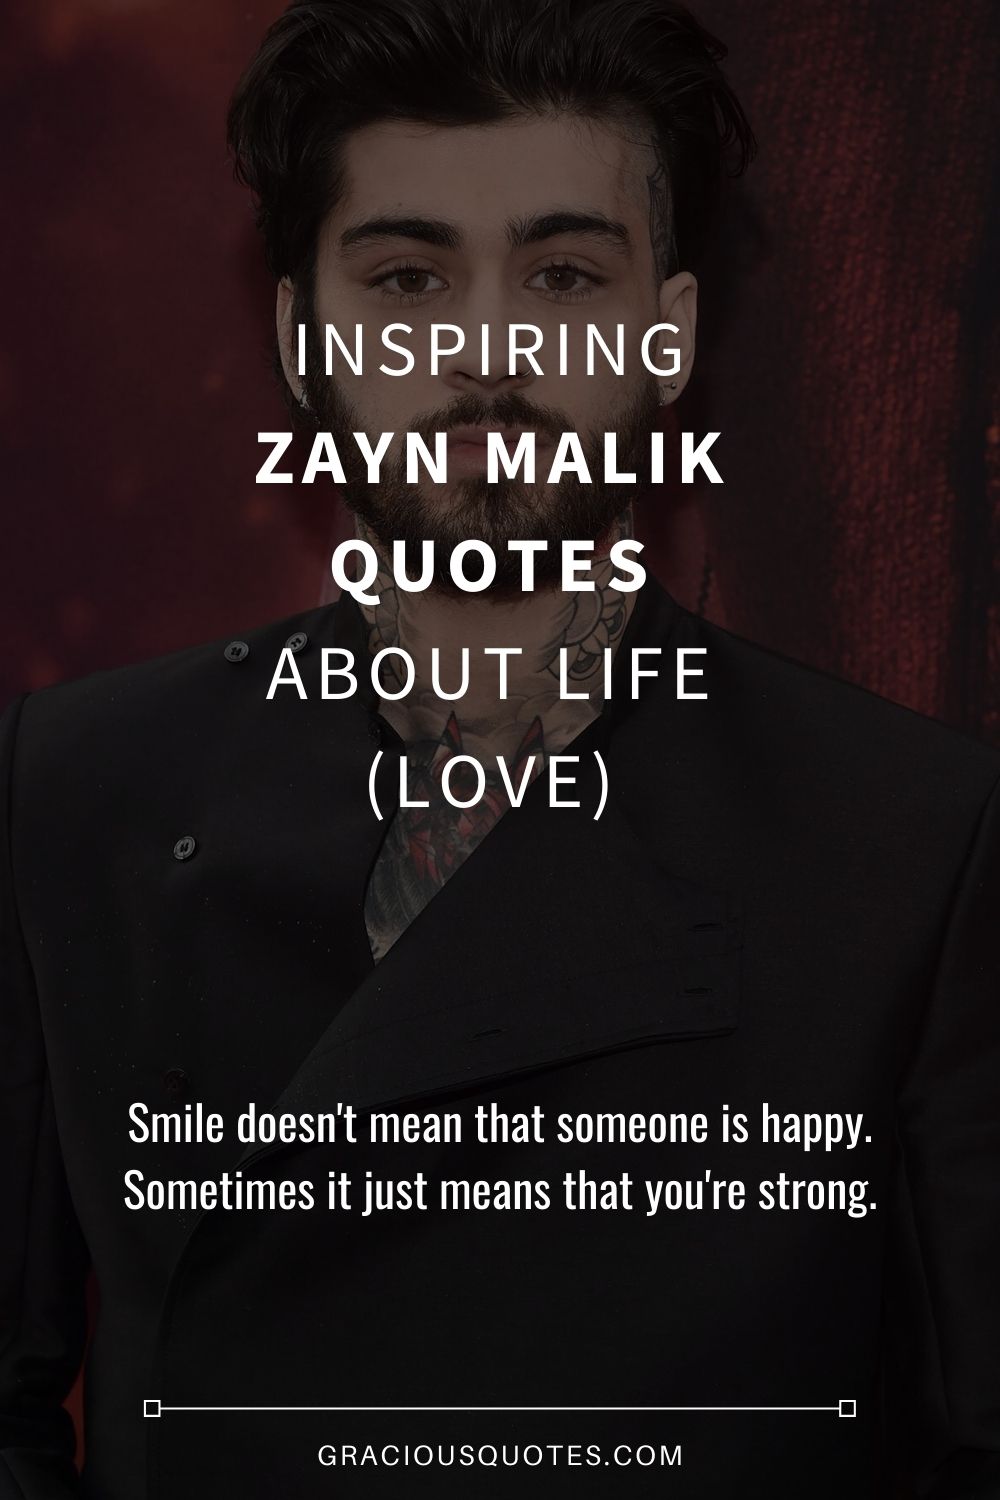 Inspiring Zayn Malik Quotes About Life (LOVE) - Gracious Quotes